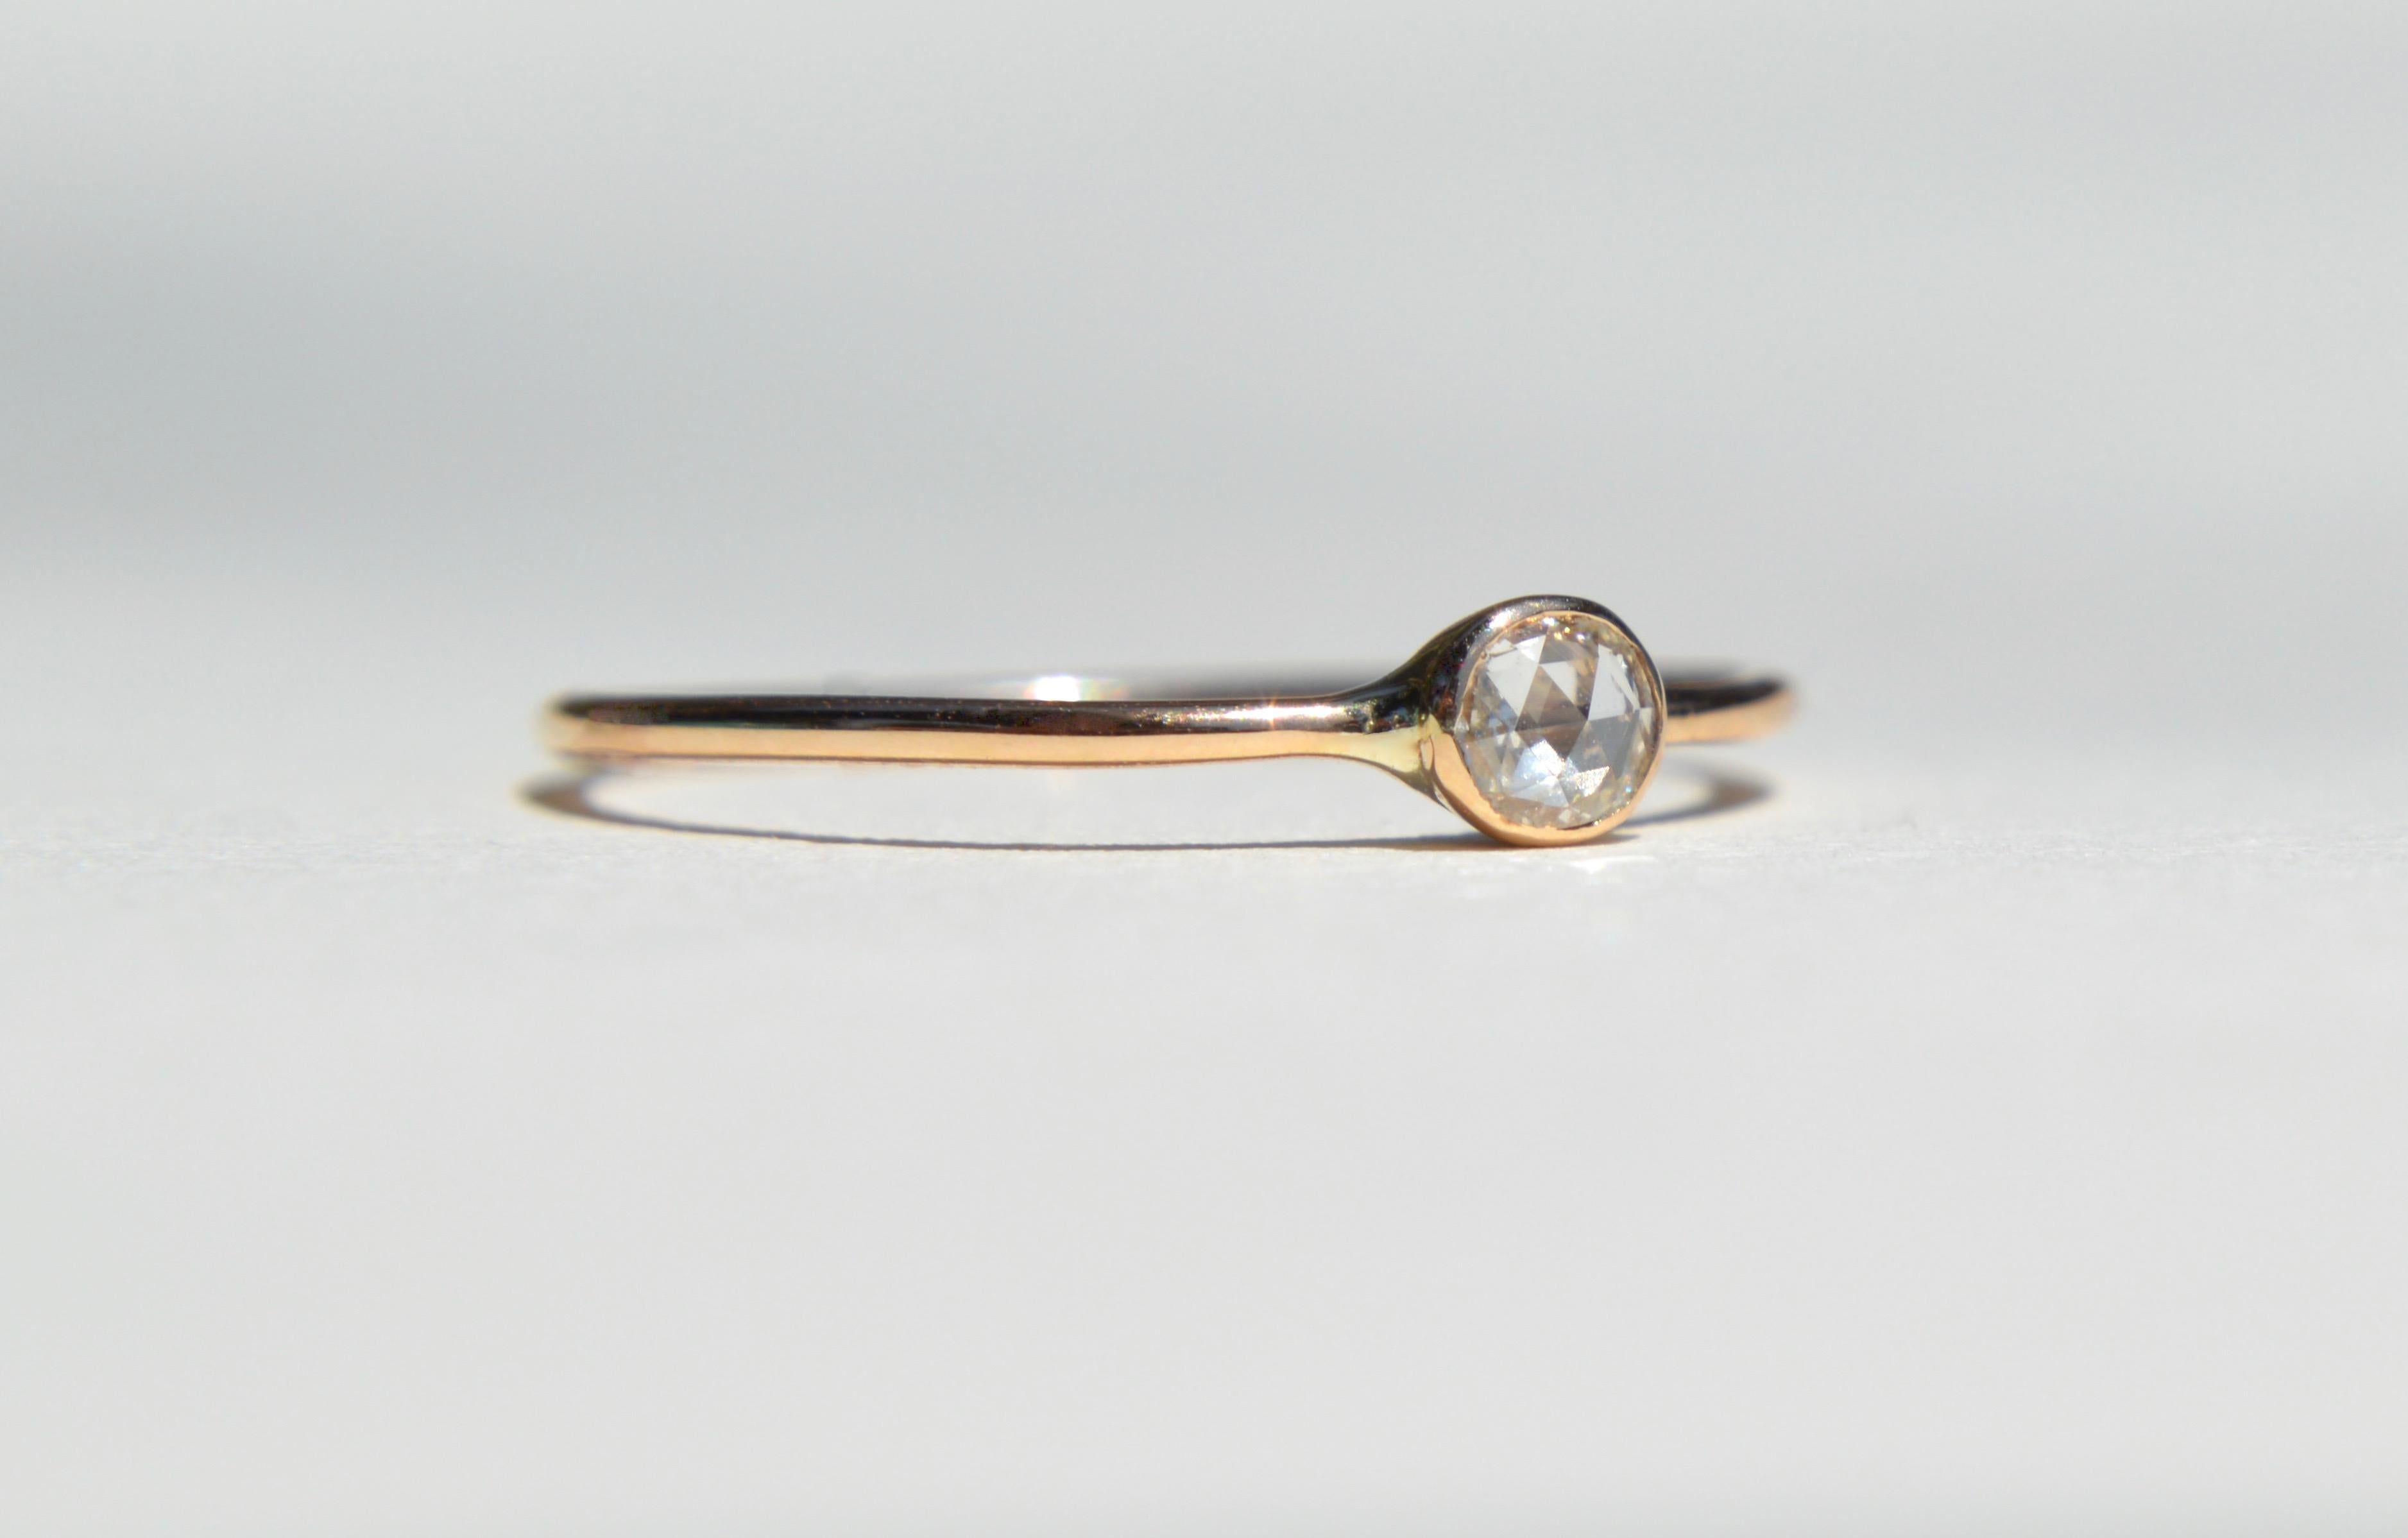 Minimal and lovely .21 Carat rosecut diamond engagement ring set in 14K yellow gold. Diamond measures 4.5x3.5mm. Diamond has been graded as color E (near colorless), clarity VVS1 (very very slightly included). 1mm wide round delicate band. Size